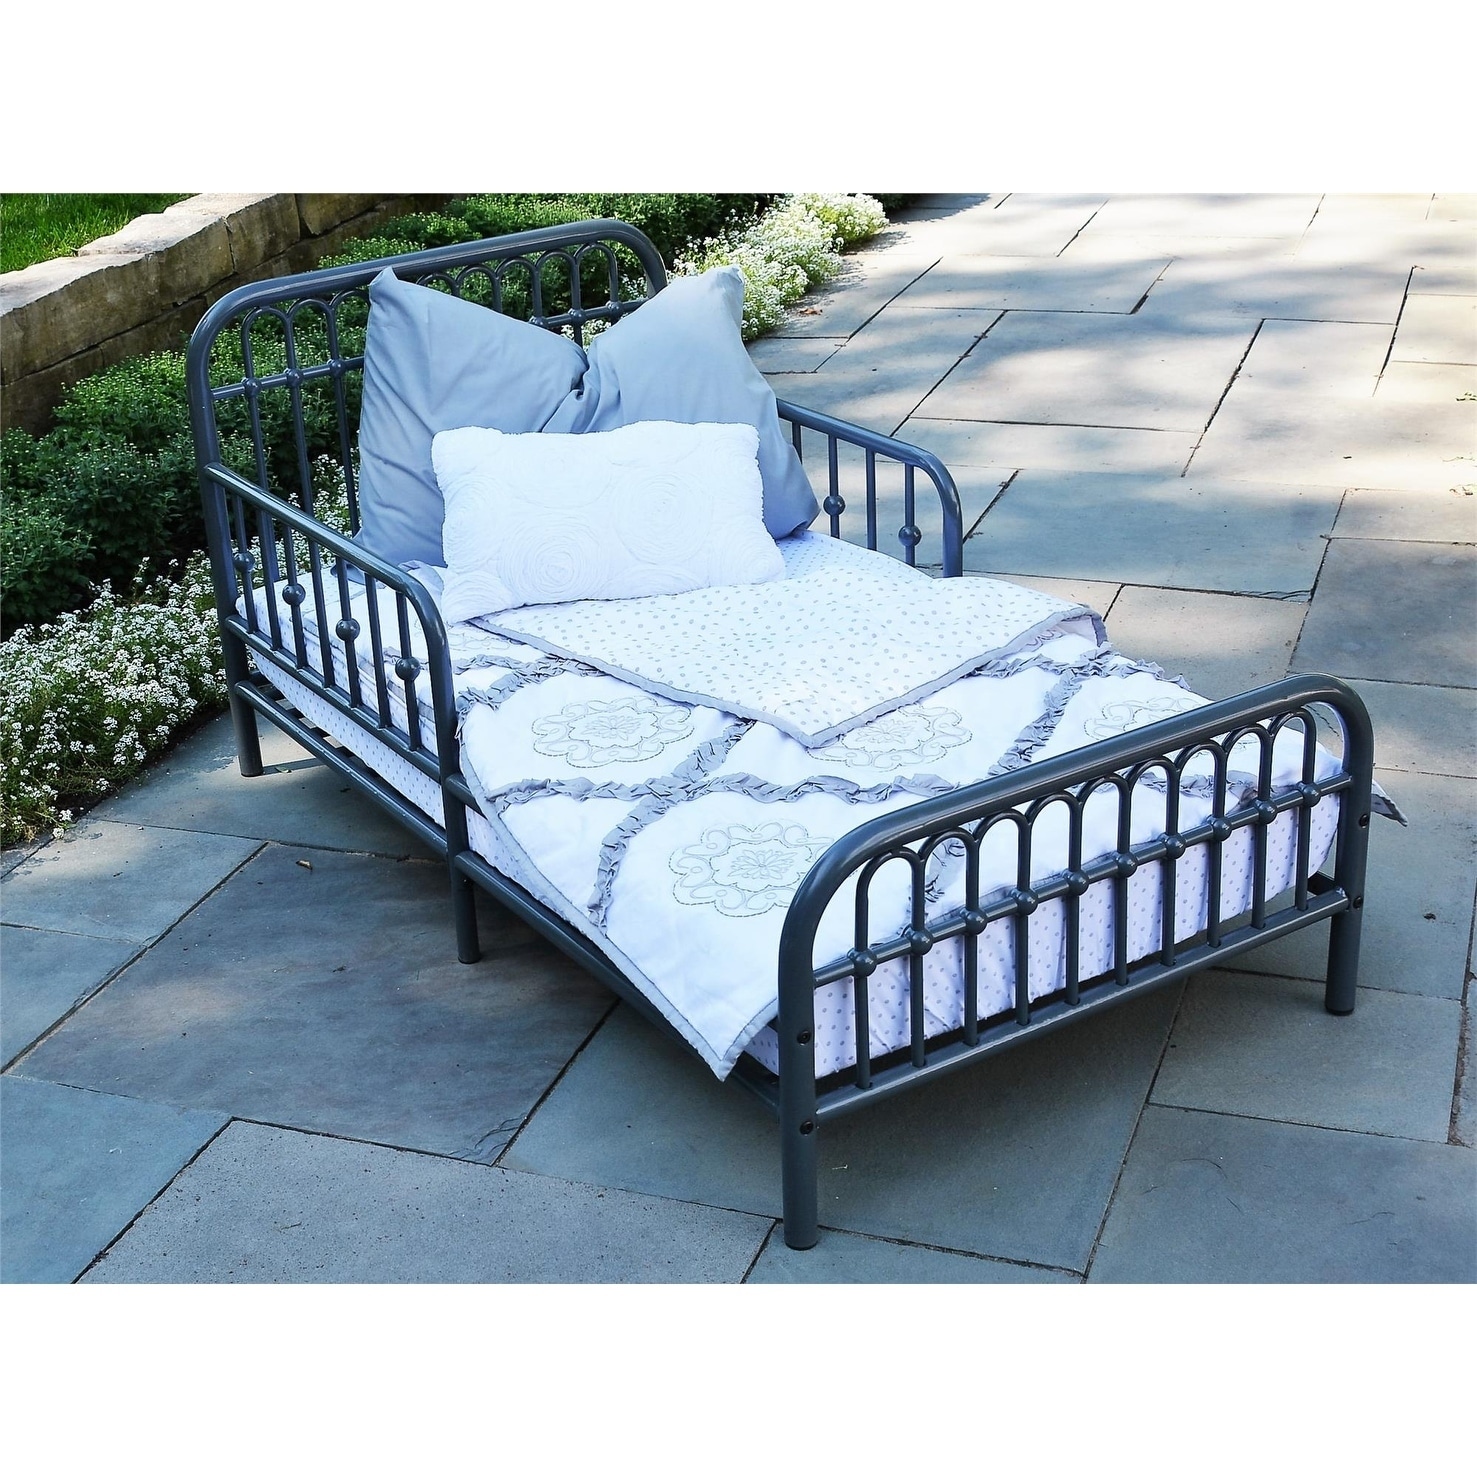 Featured image of post Metal Toddler Bed Frame / And separated mattress for toddlers from the game, edited to suit my future bed frames.